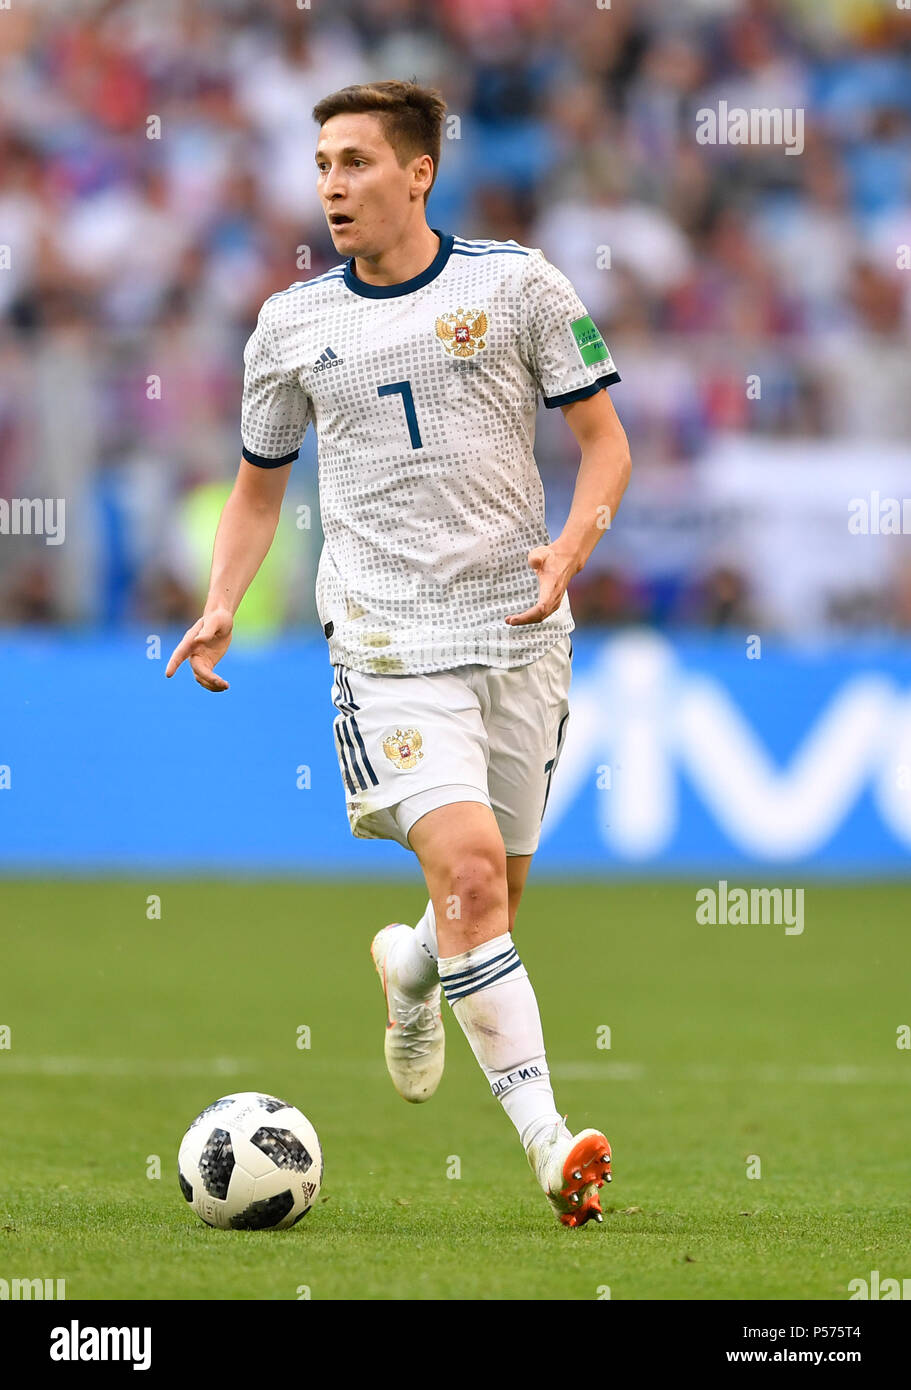 Samara, Russia. 25th June, 2018. Soccer: World Cup, group stages, group A, 3rd matchday Uruguay vs Russia, at Samara Stadium. Russia's Daler Kuzyayev in action. Credit: Marius Becker/dpa/Alamy Live News Stock Photo